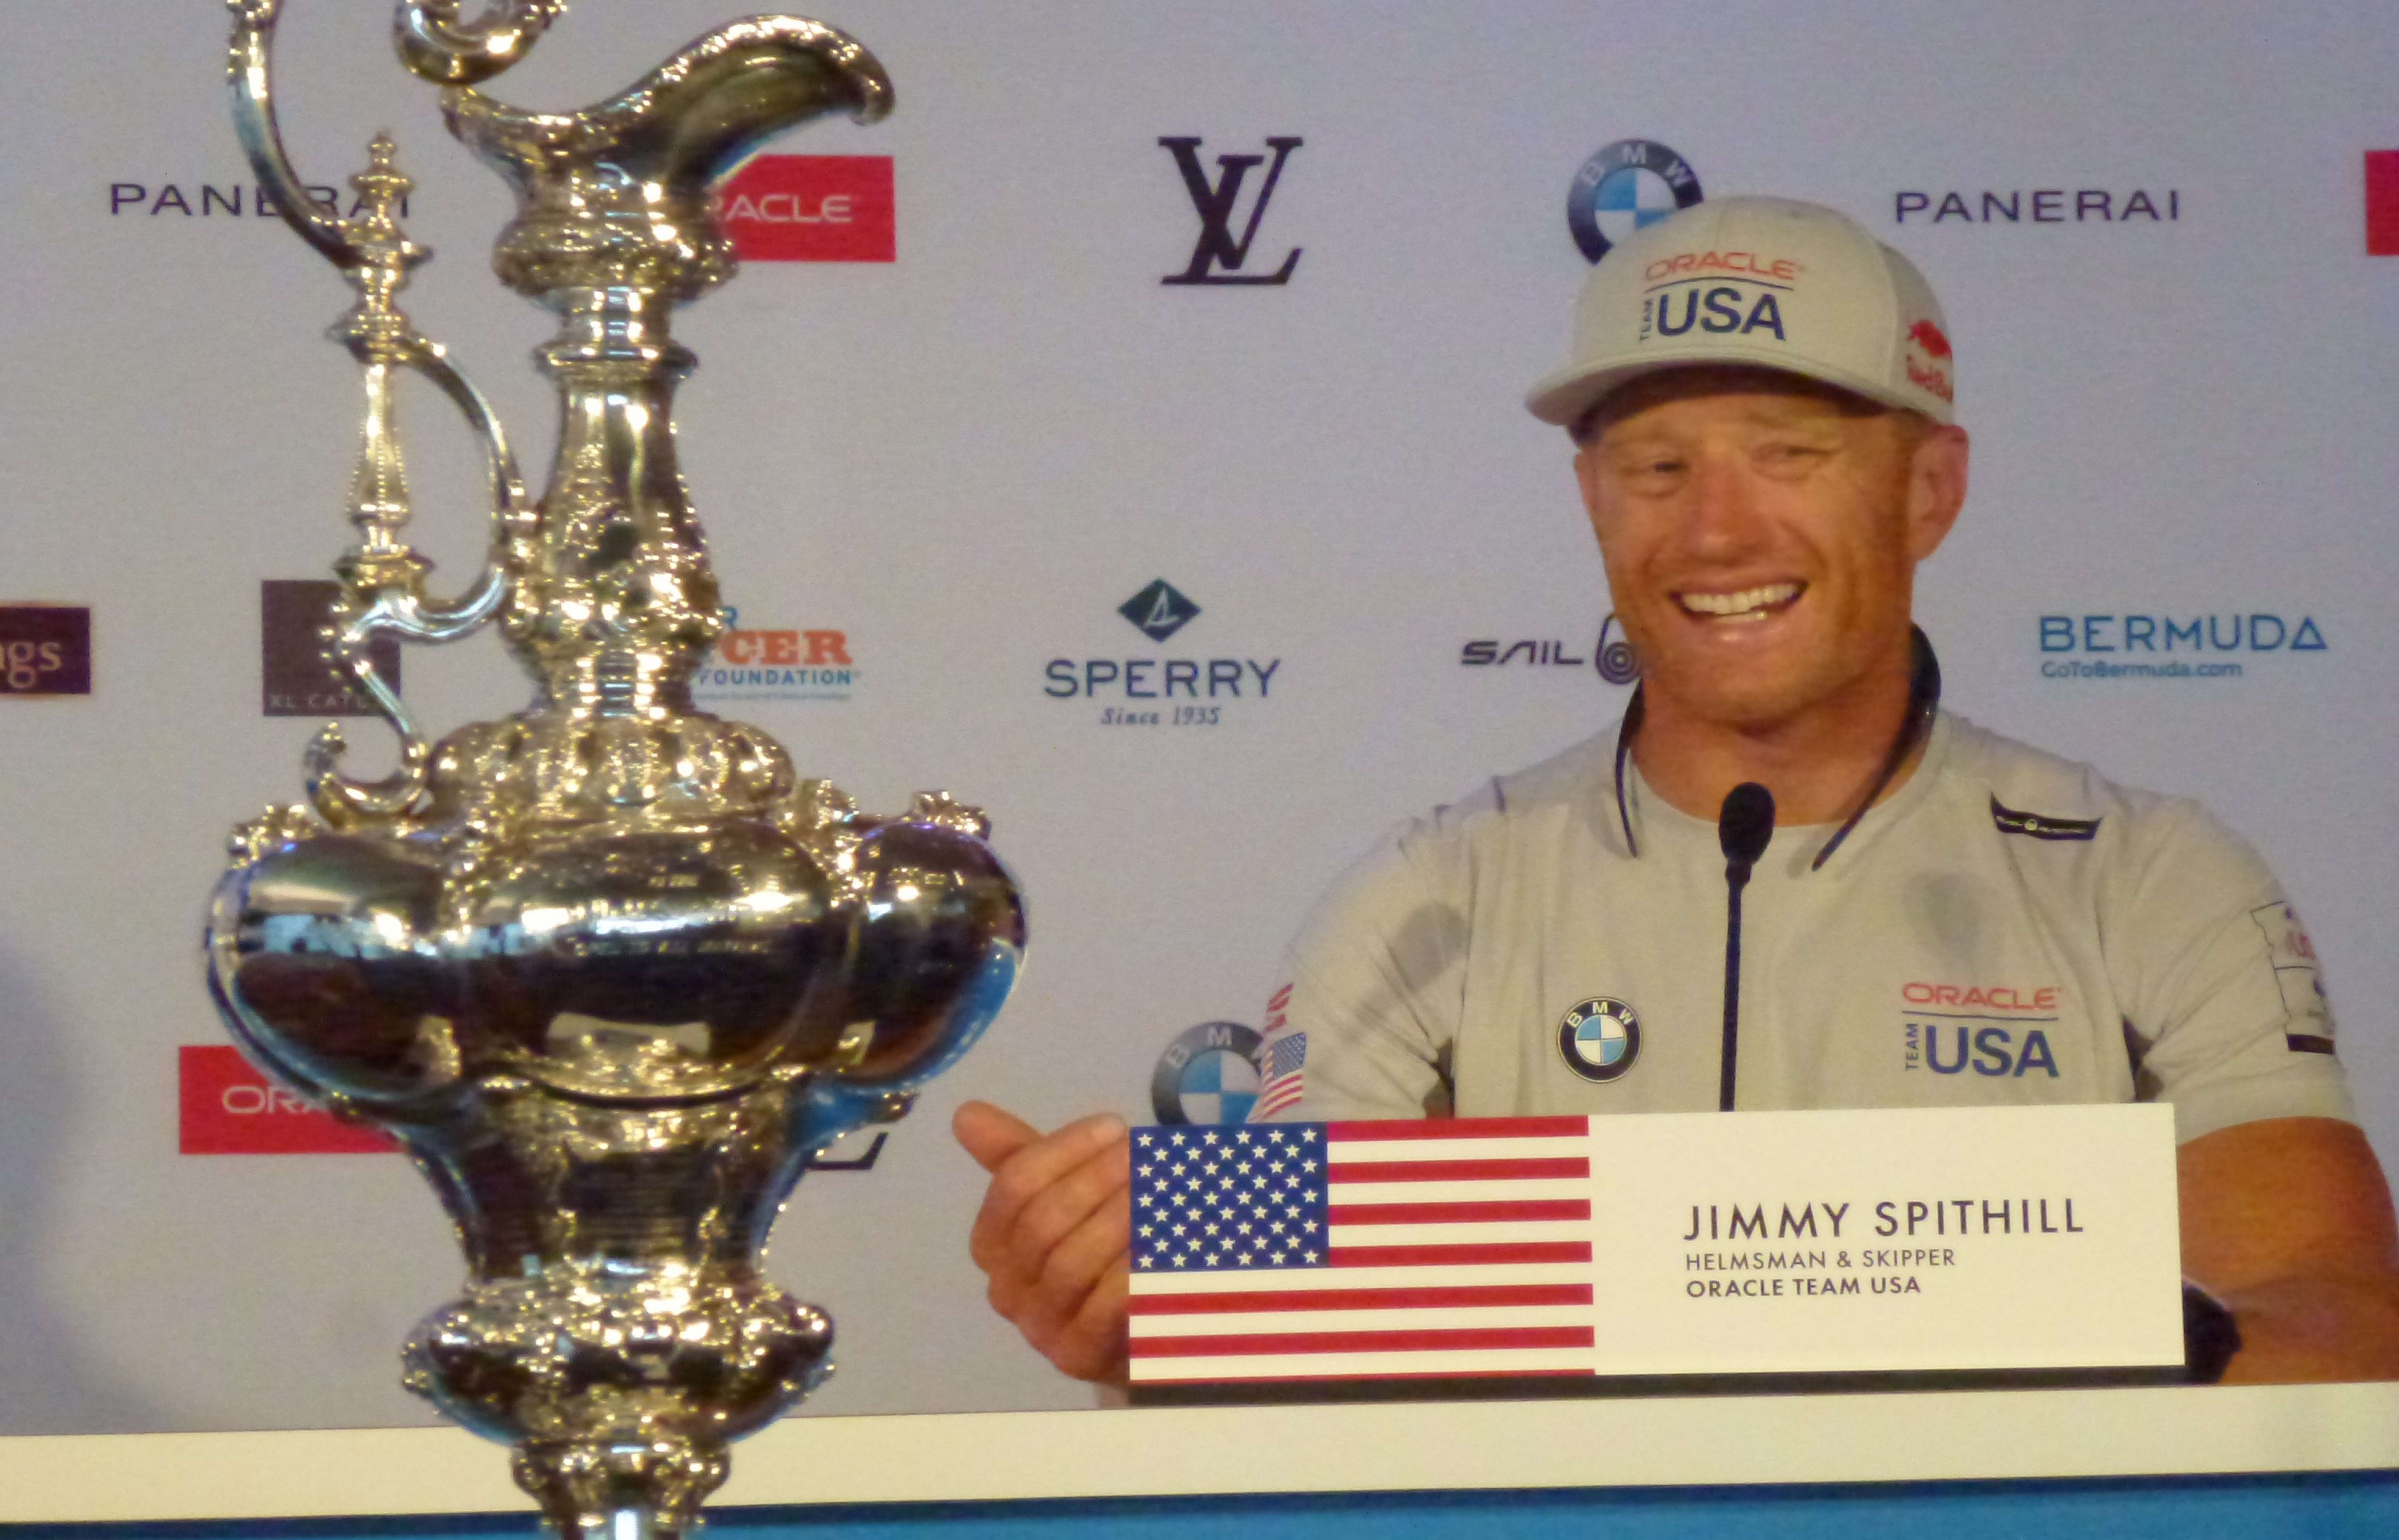 Oracle Team USA skipper Jimmy Spithill with the America's Cup in Bermuda.